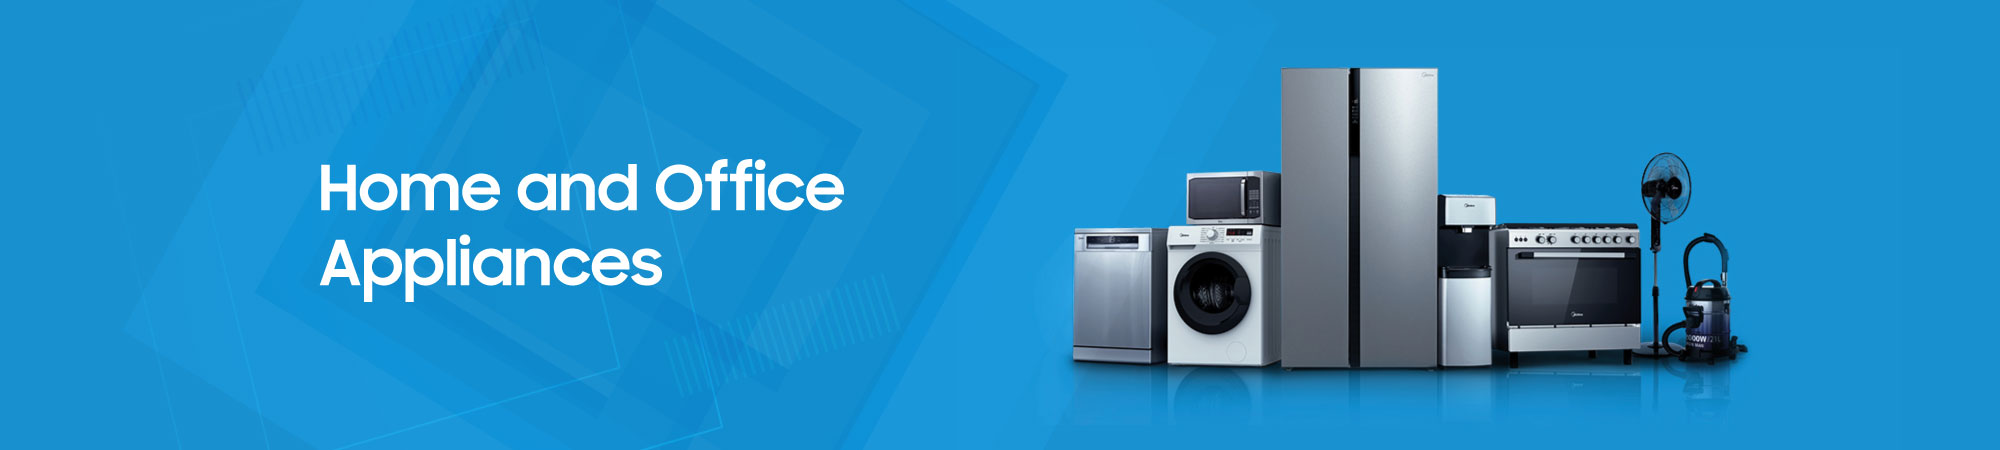 Home and Office Appliances